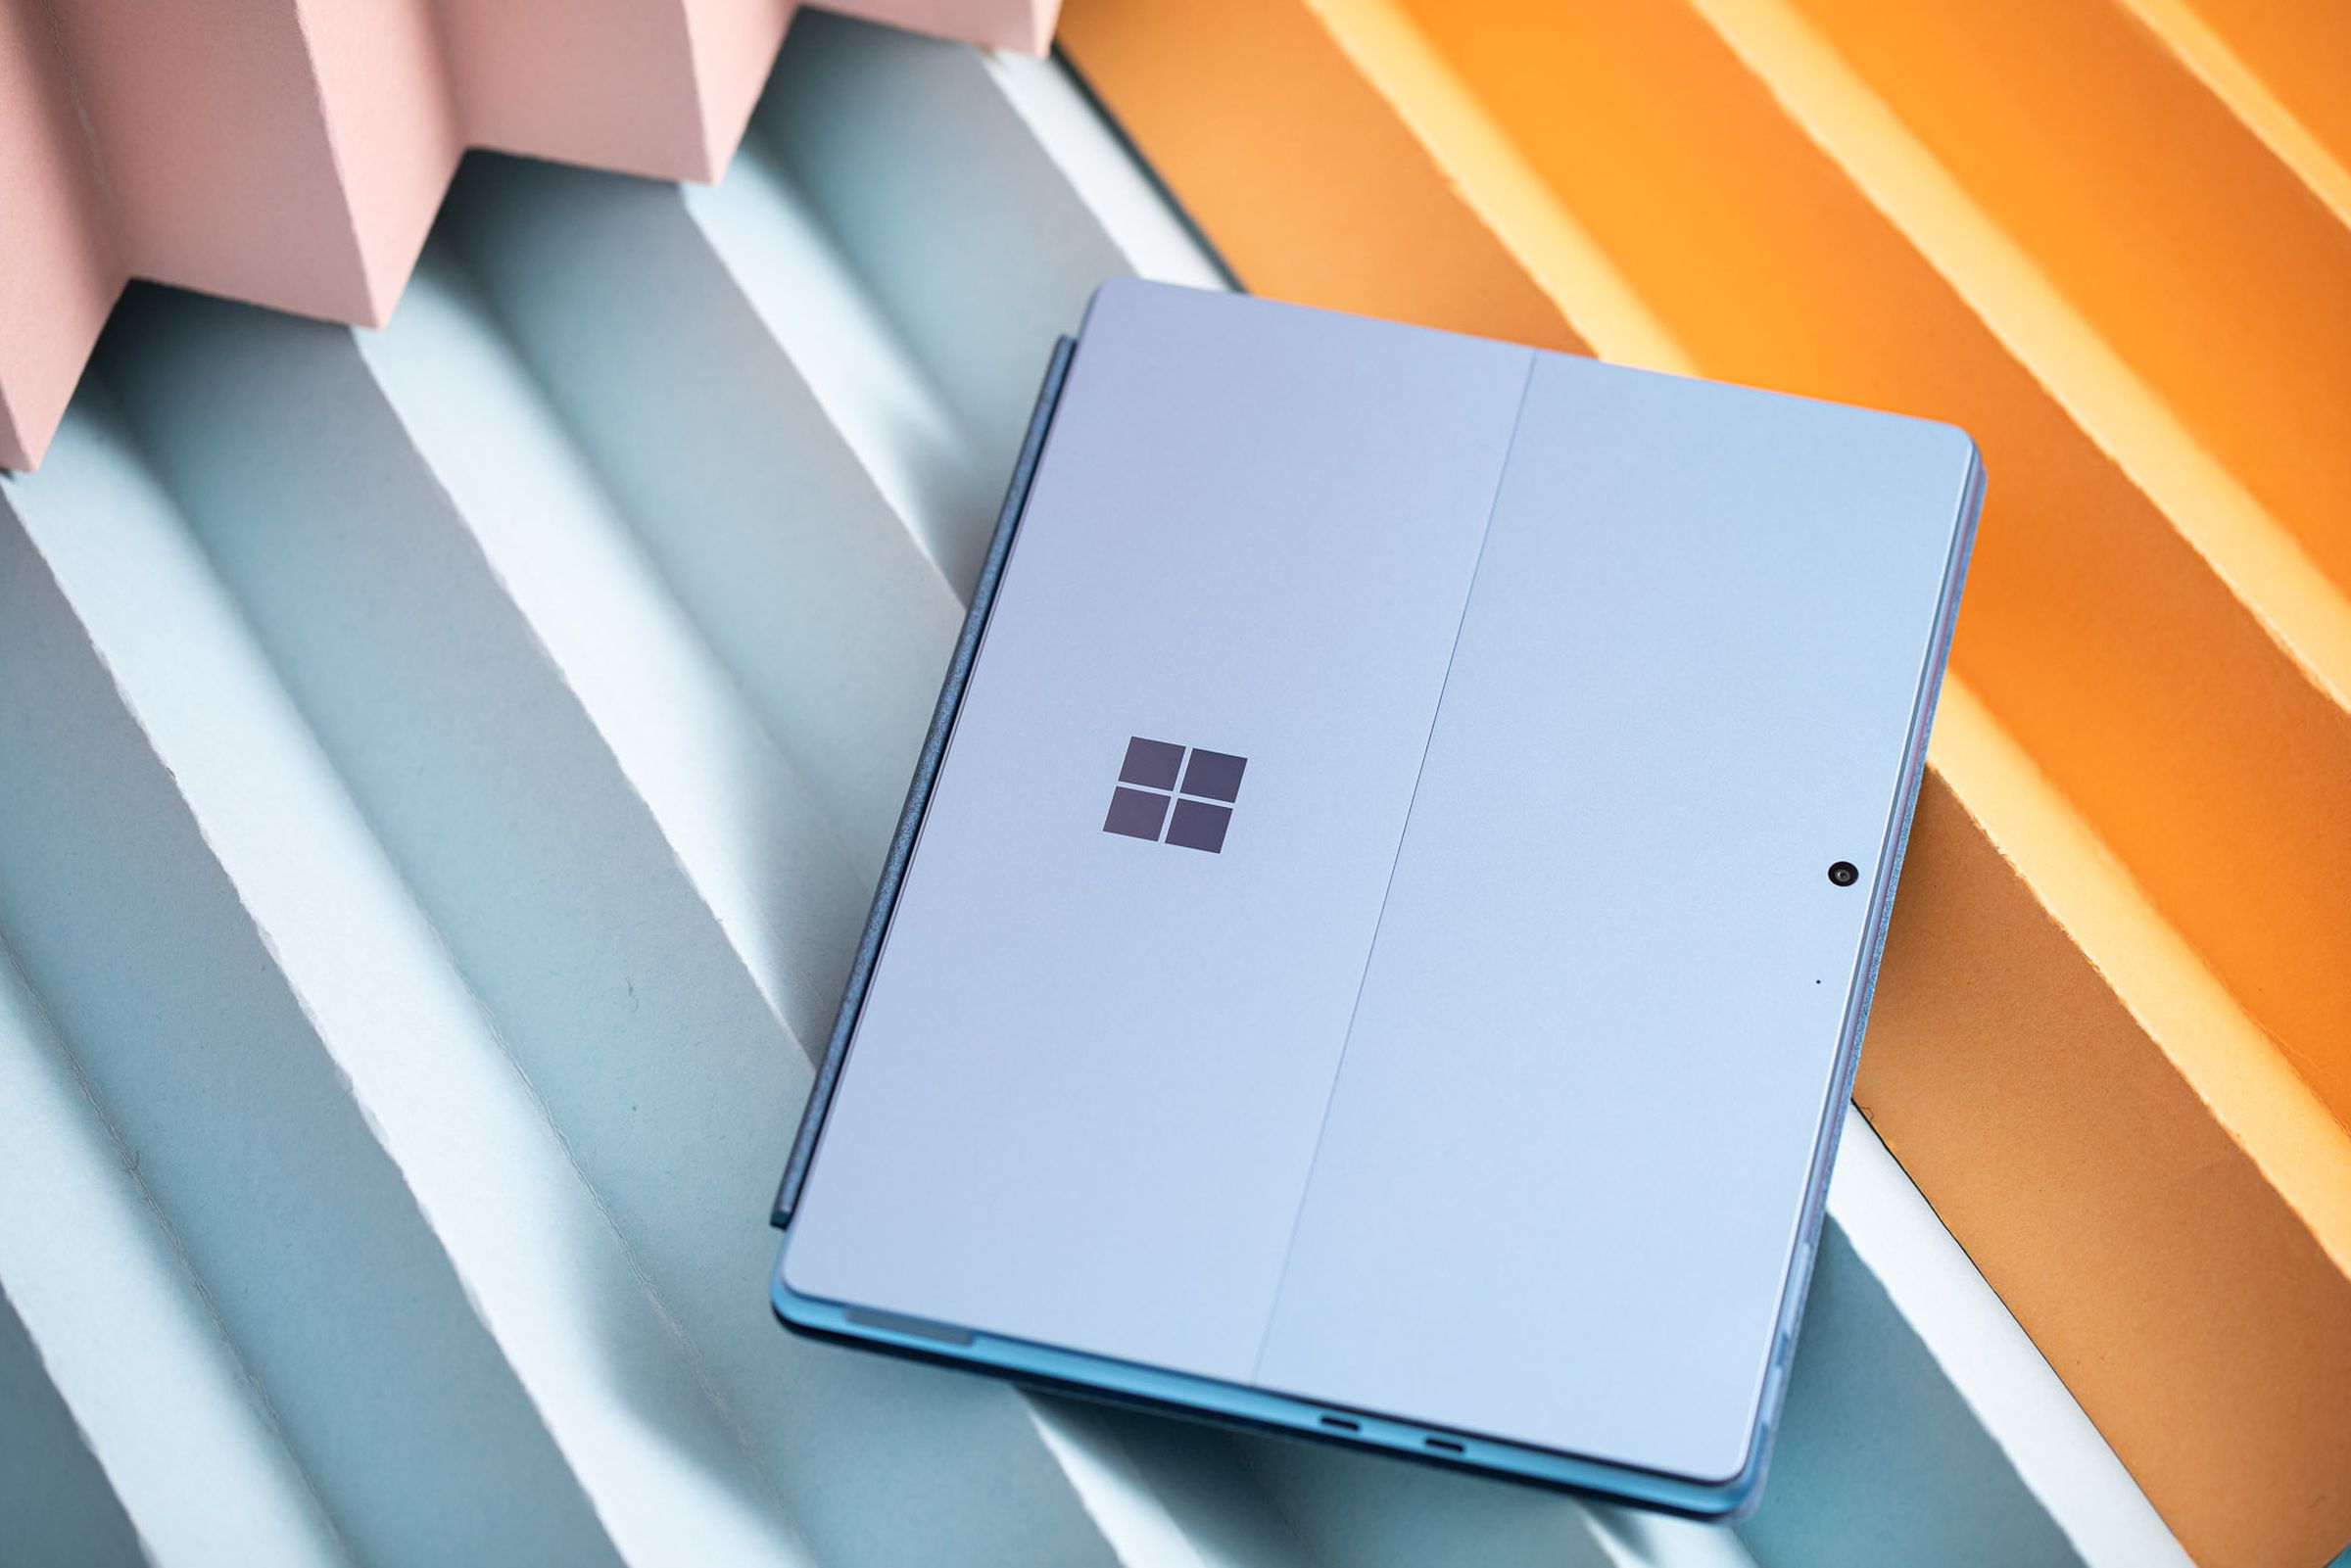 The Microsoft Surface Pro 9 closed, seen from above.